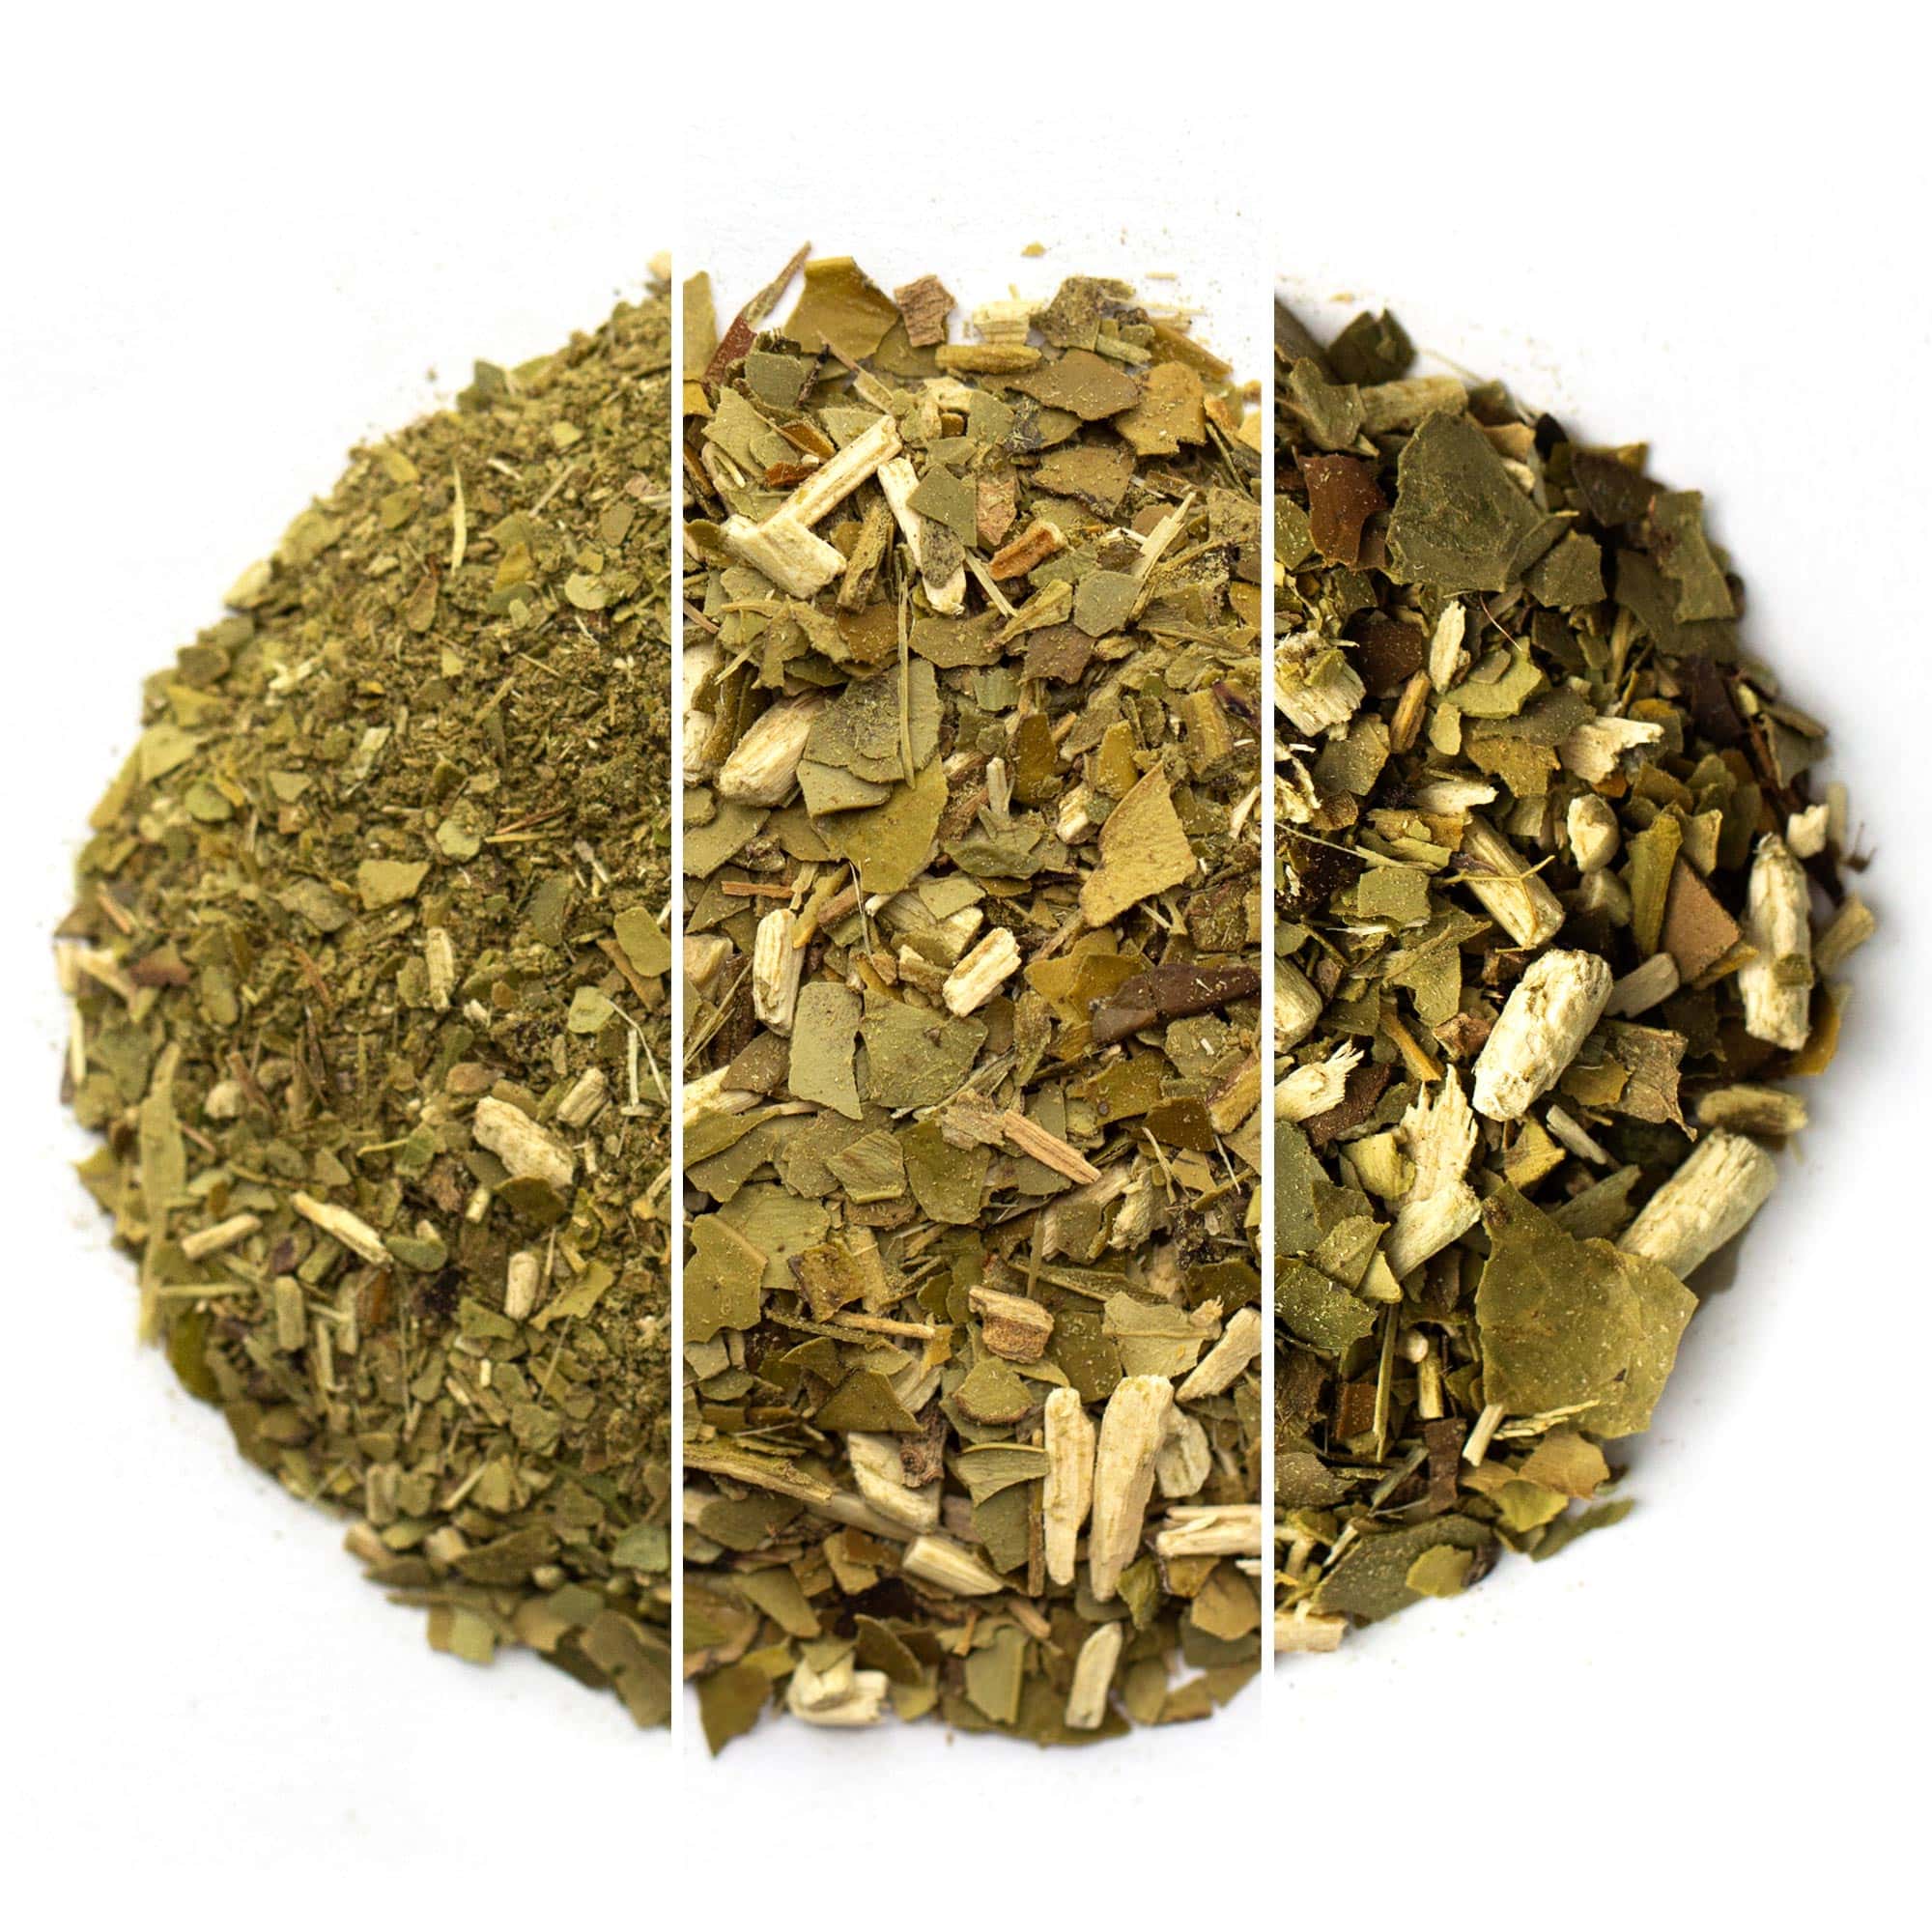 TYPES OF YERBA MATE AND HOW TO CHOOSE THEM